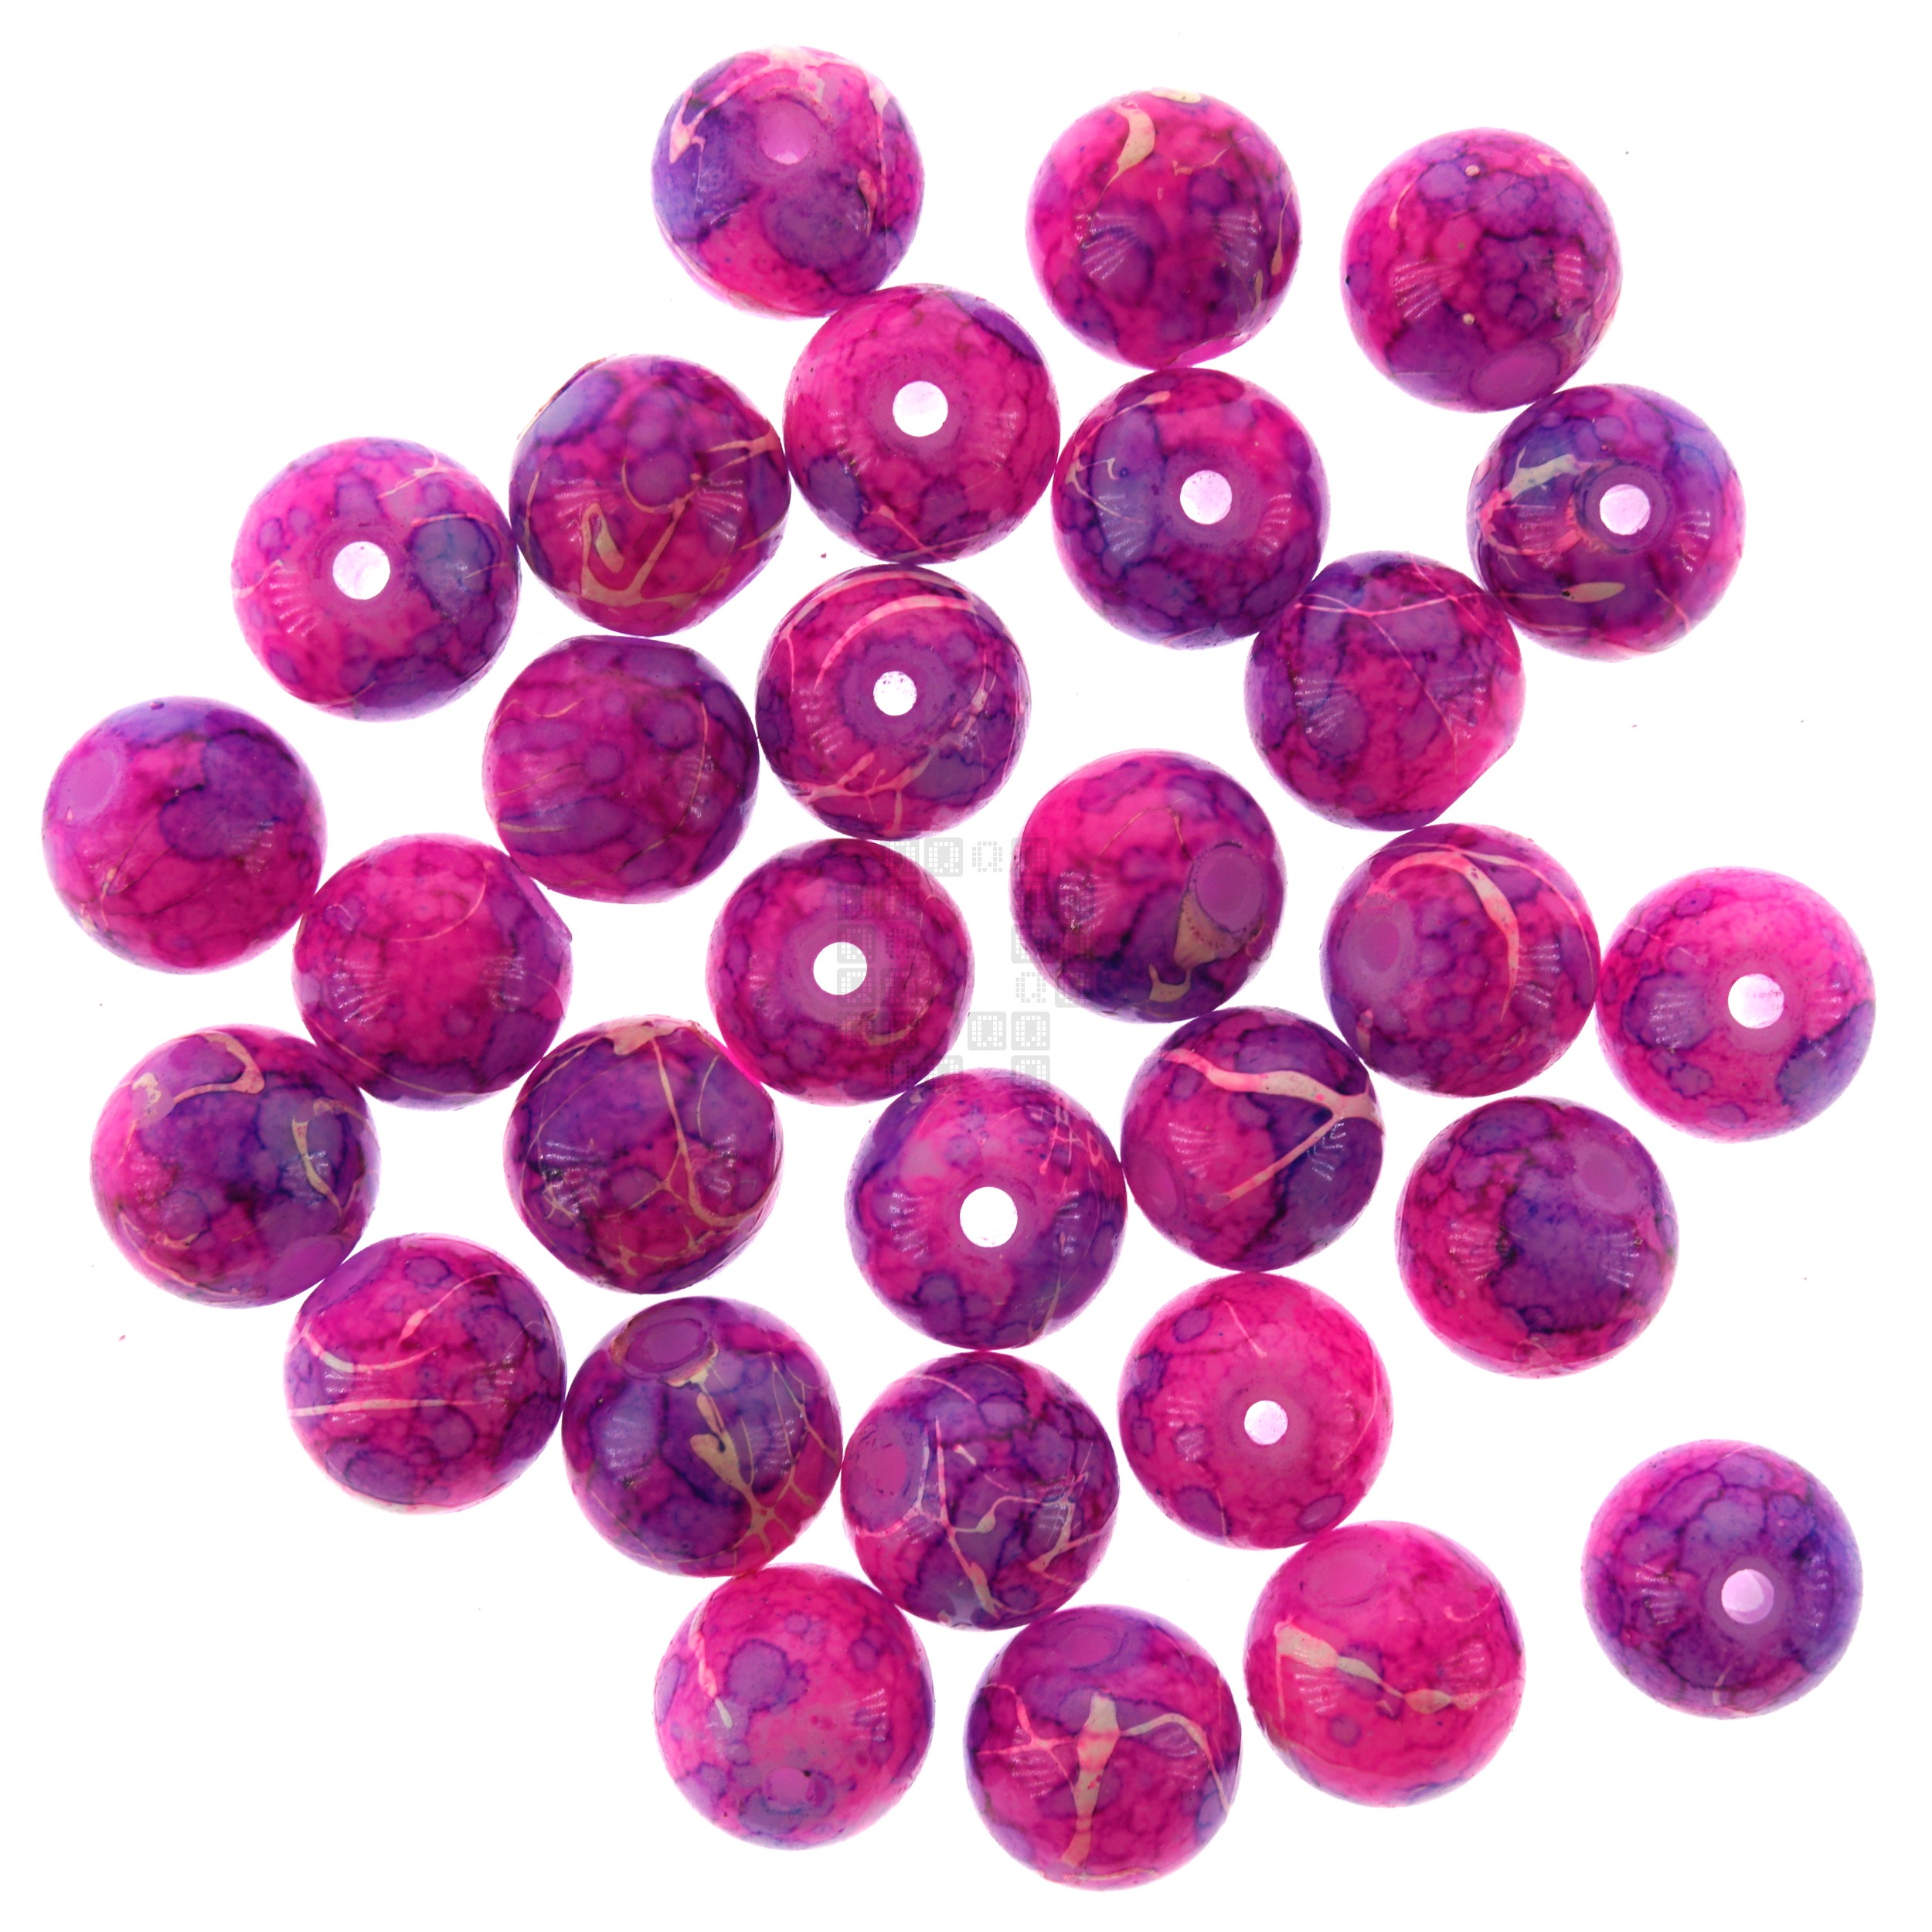 African Violet Pink/Purple 8mm Loose Glass Beads, 30 Pieces